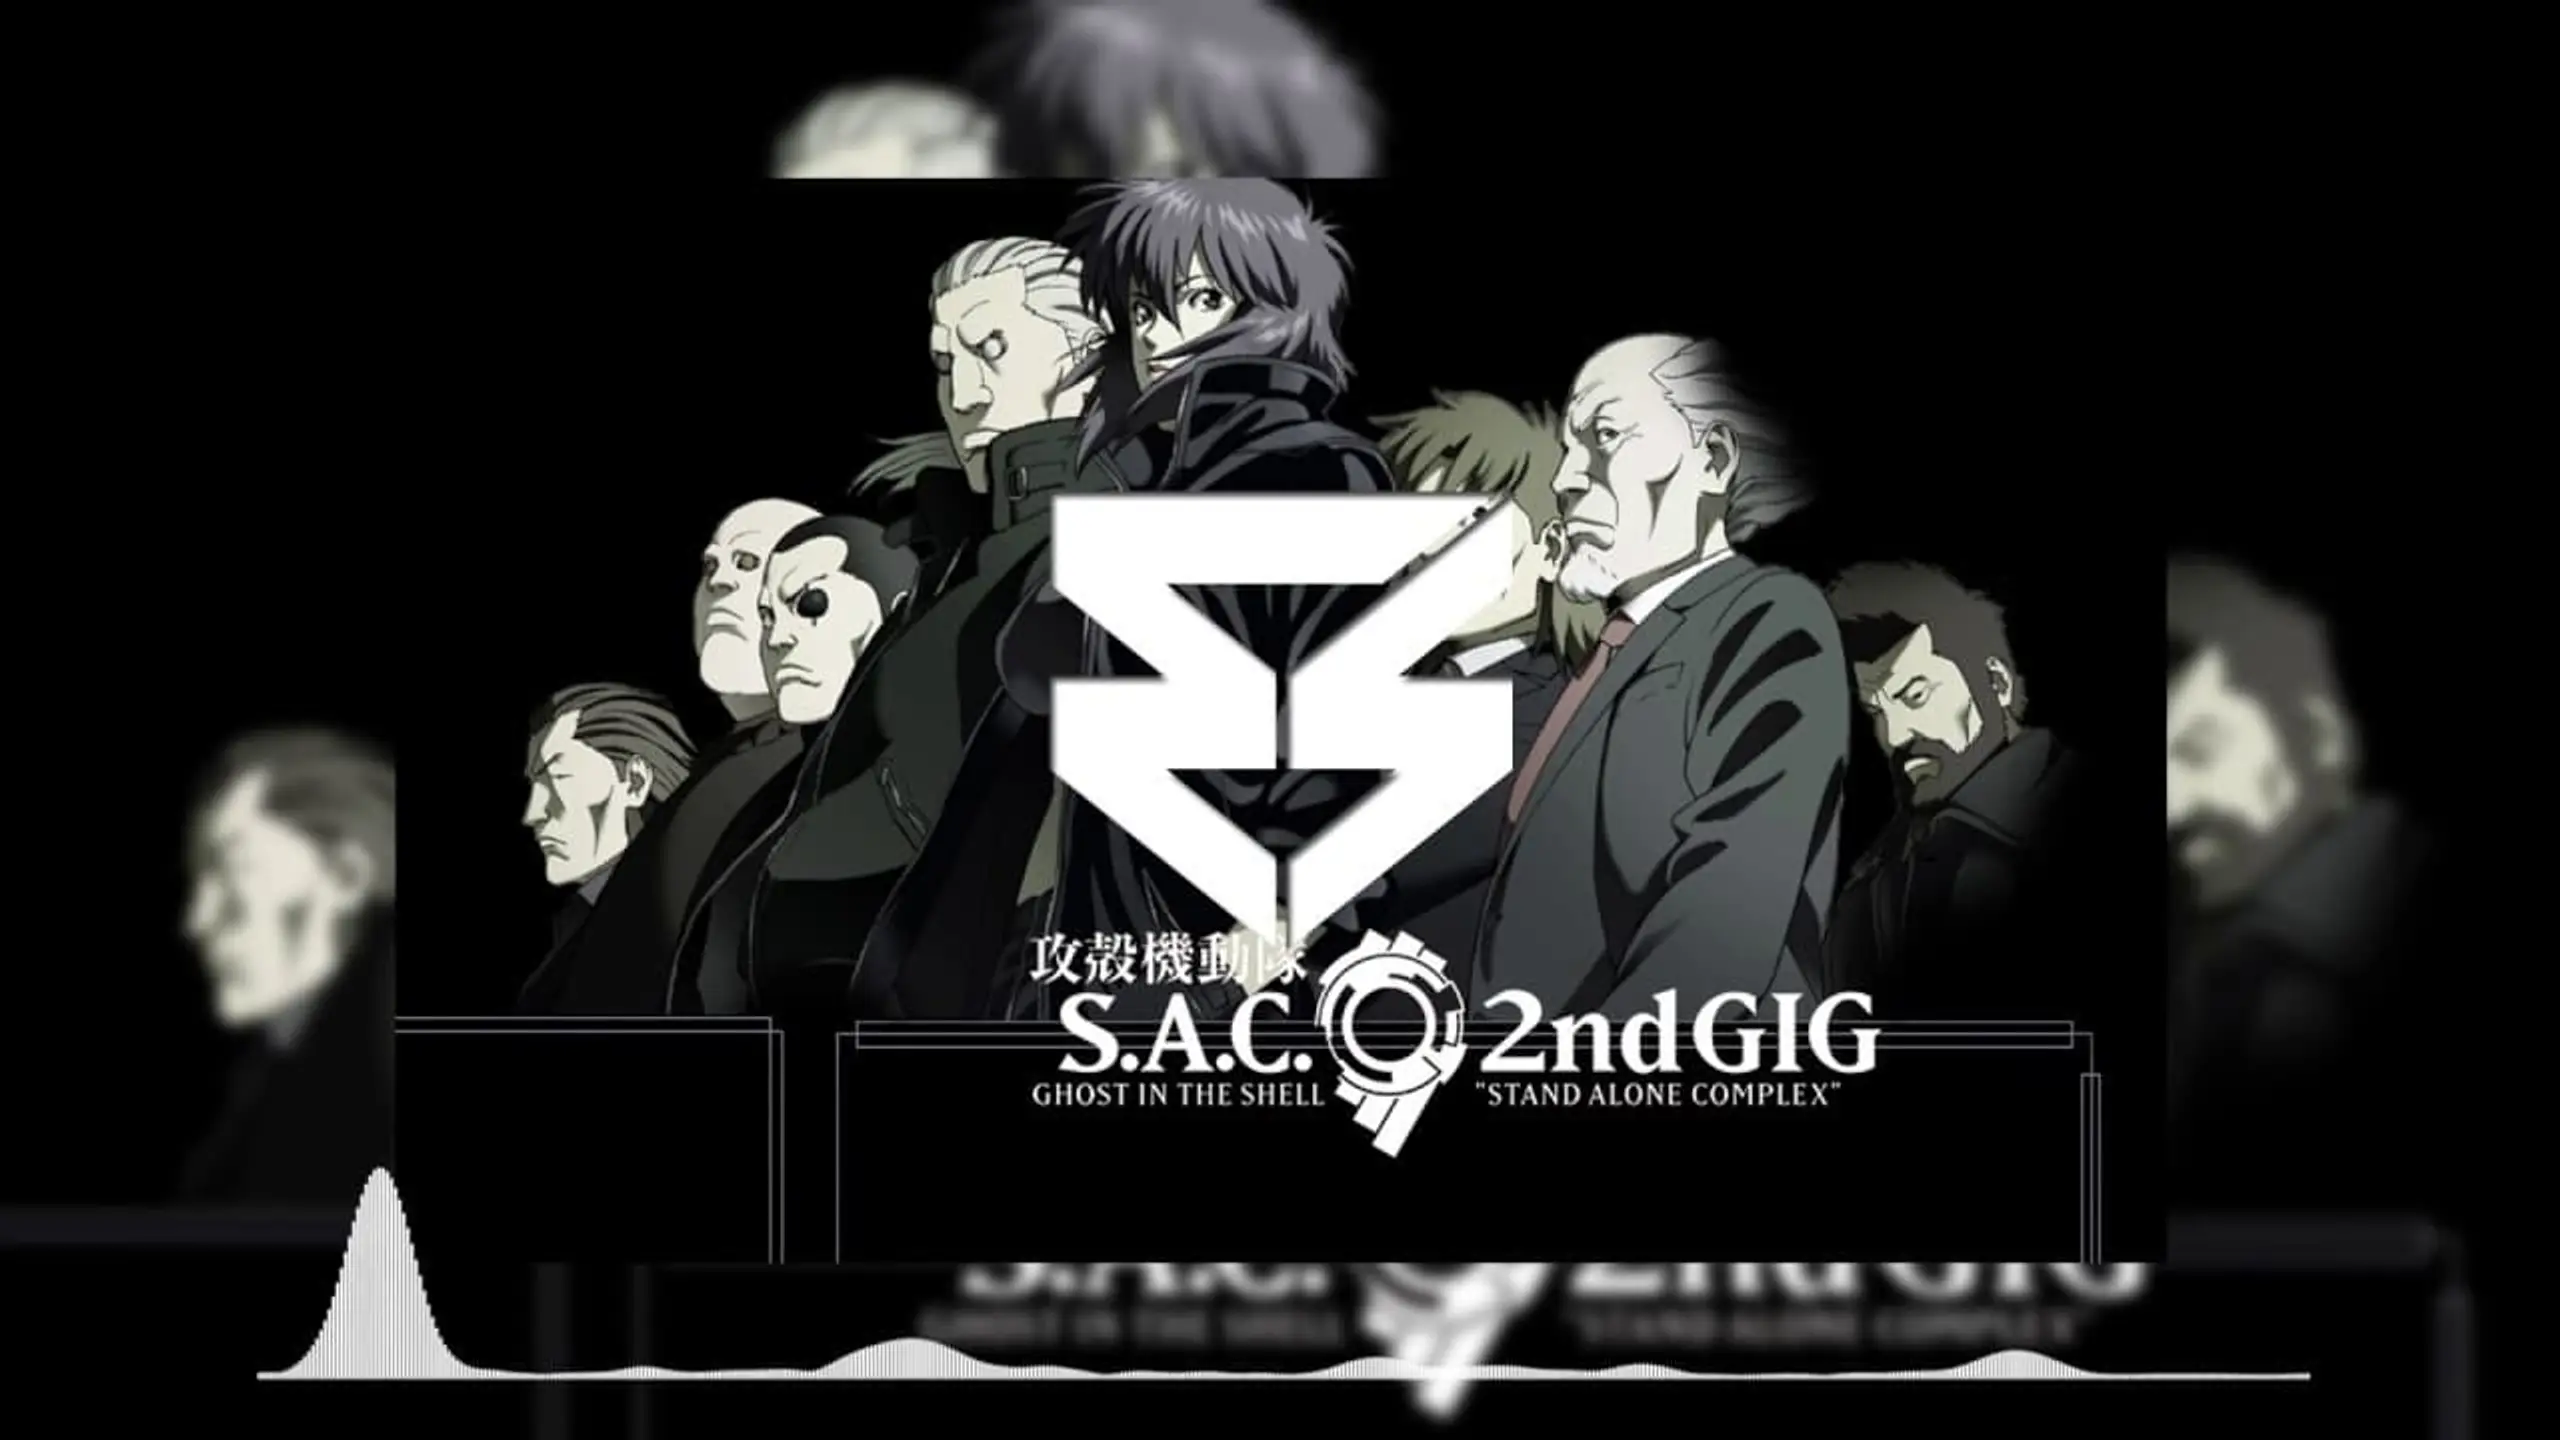 Ghost in the Shell: S.A.C. 2nd GIG - Individual Eleven